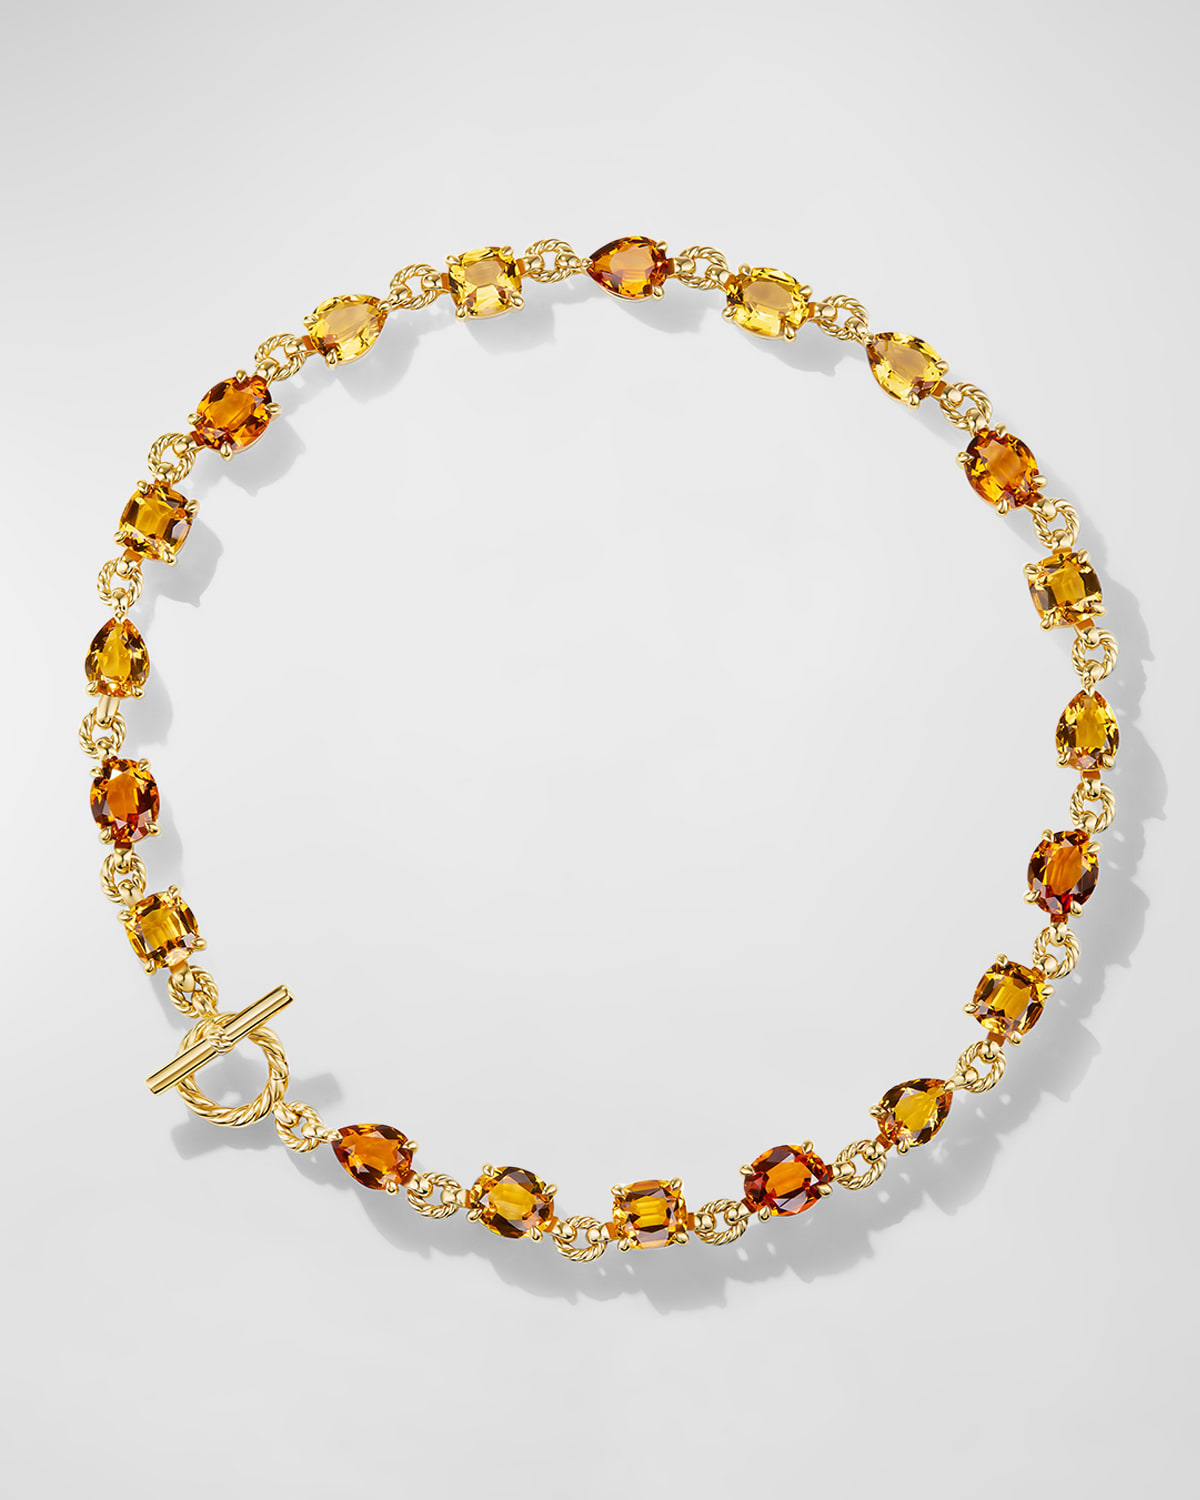 Marbella Necklace with Gemstones in 18K Gold, 19"L